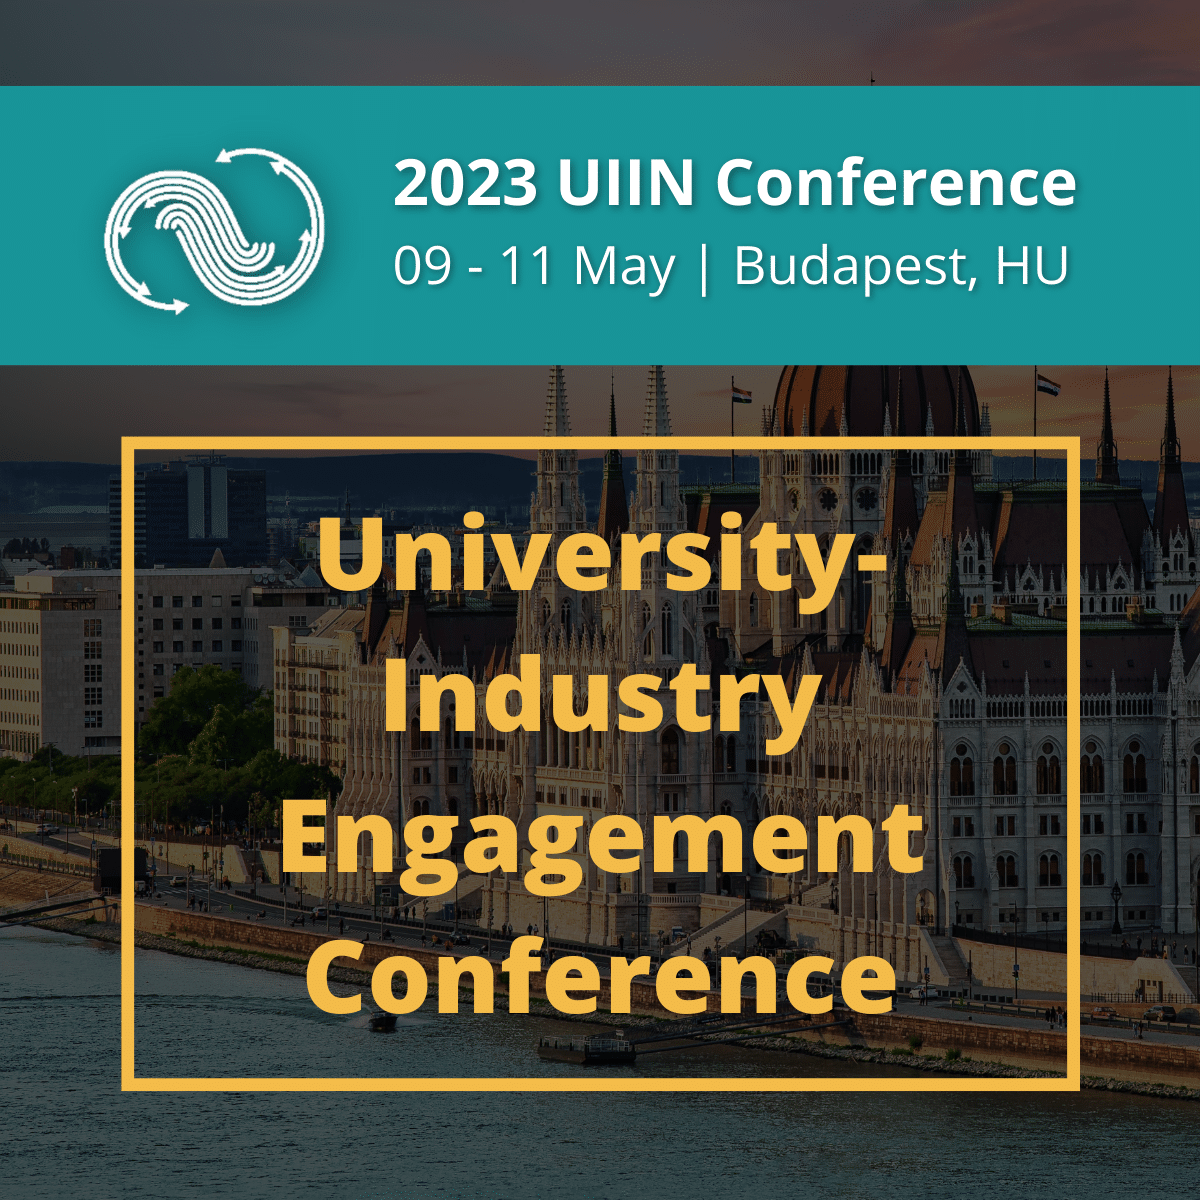 UIIN Conference 2023 on University-Industry Engagement